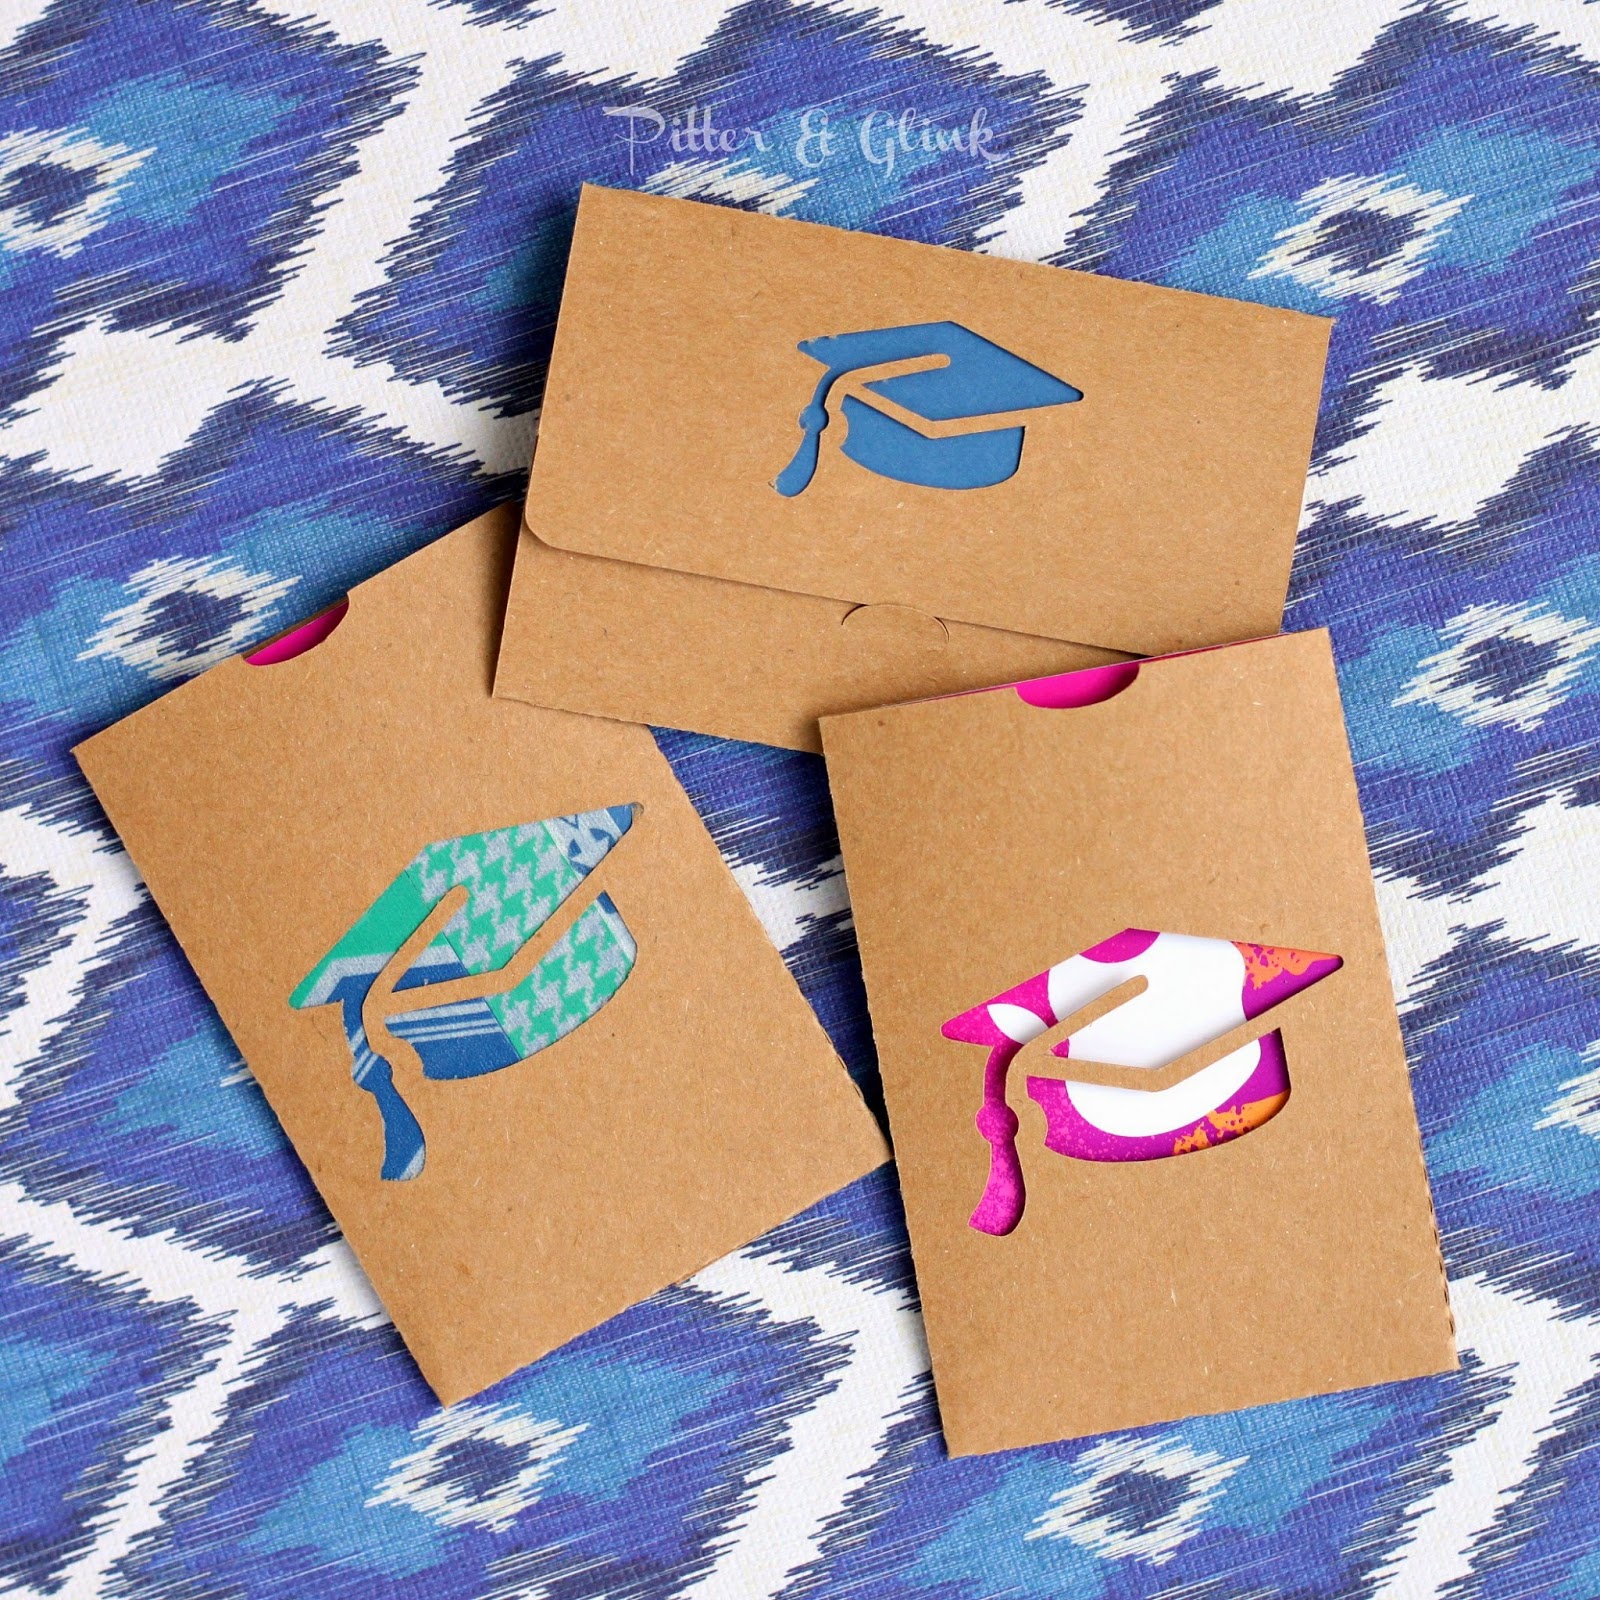 Create a cute #gift card holder for the #graduate in your life using the free #Silhouette cut file from PitterandGlink.com #graduation #graduationgift